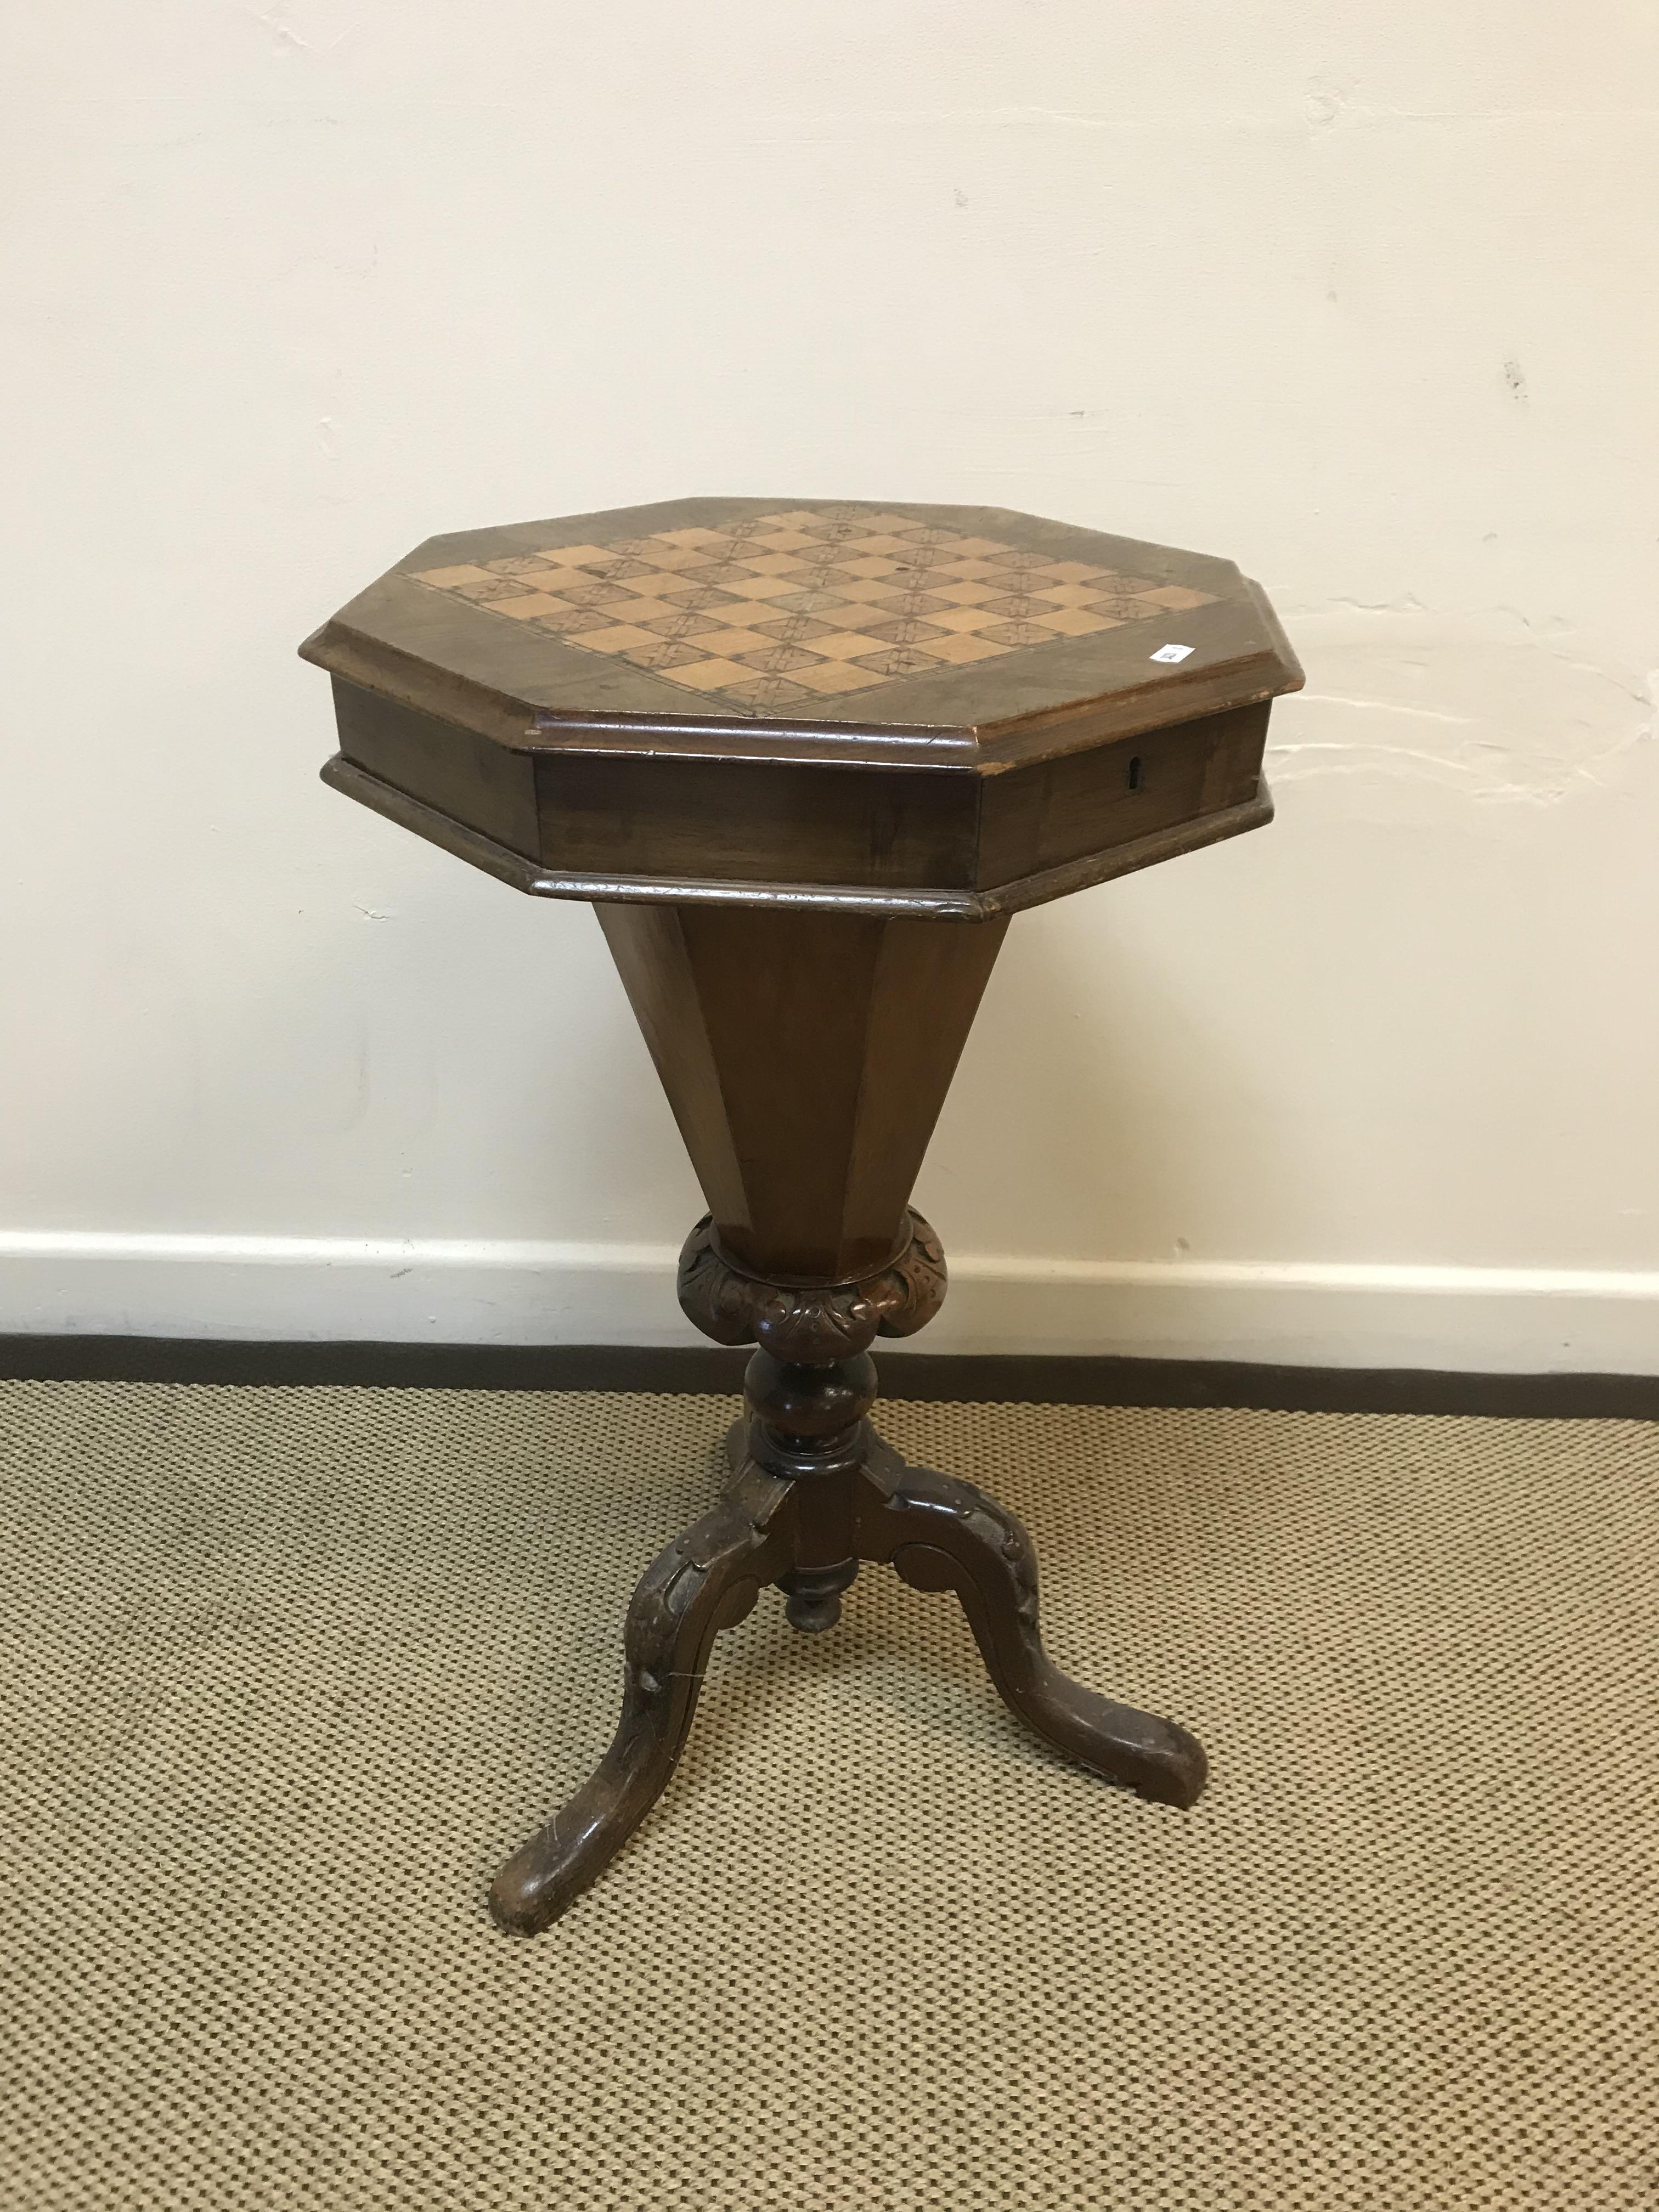 A Victorian walnut and parquetry games top trumpet-shaped work table, the rising top opening to